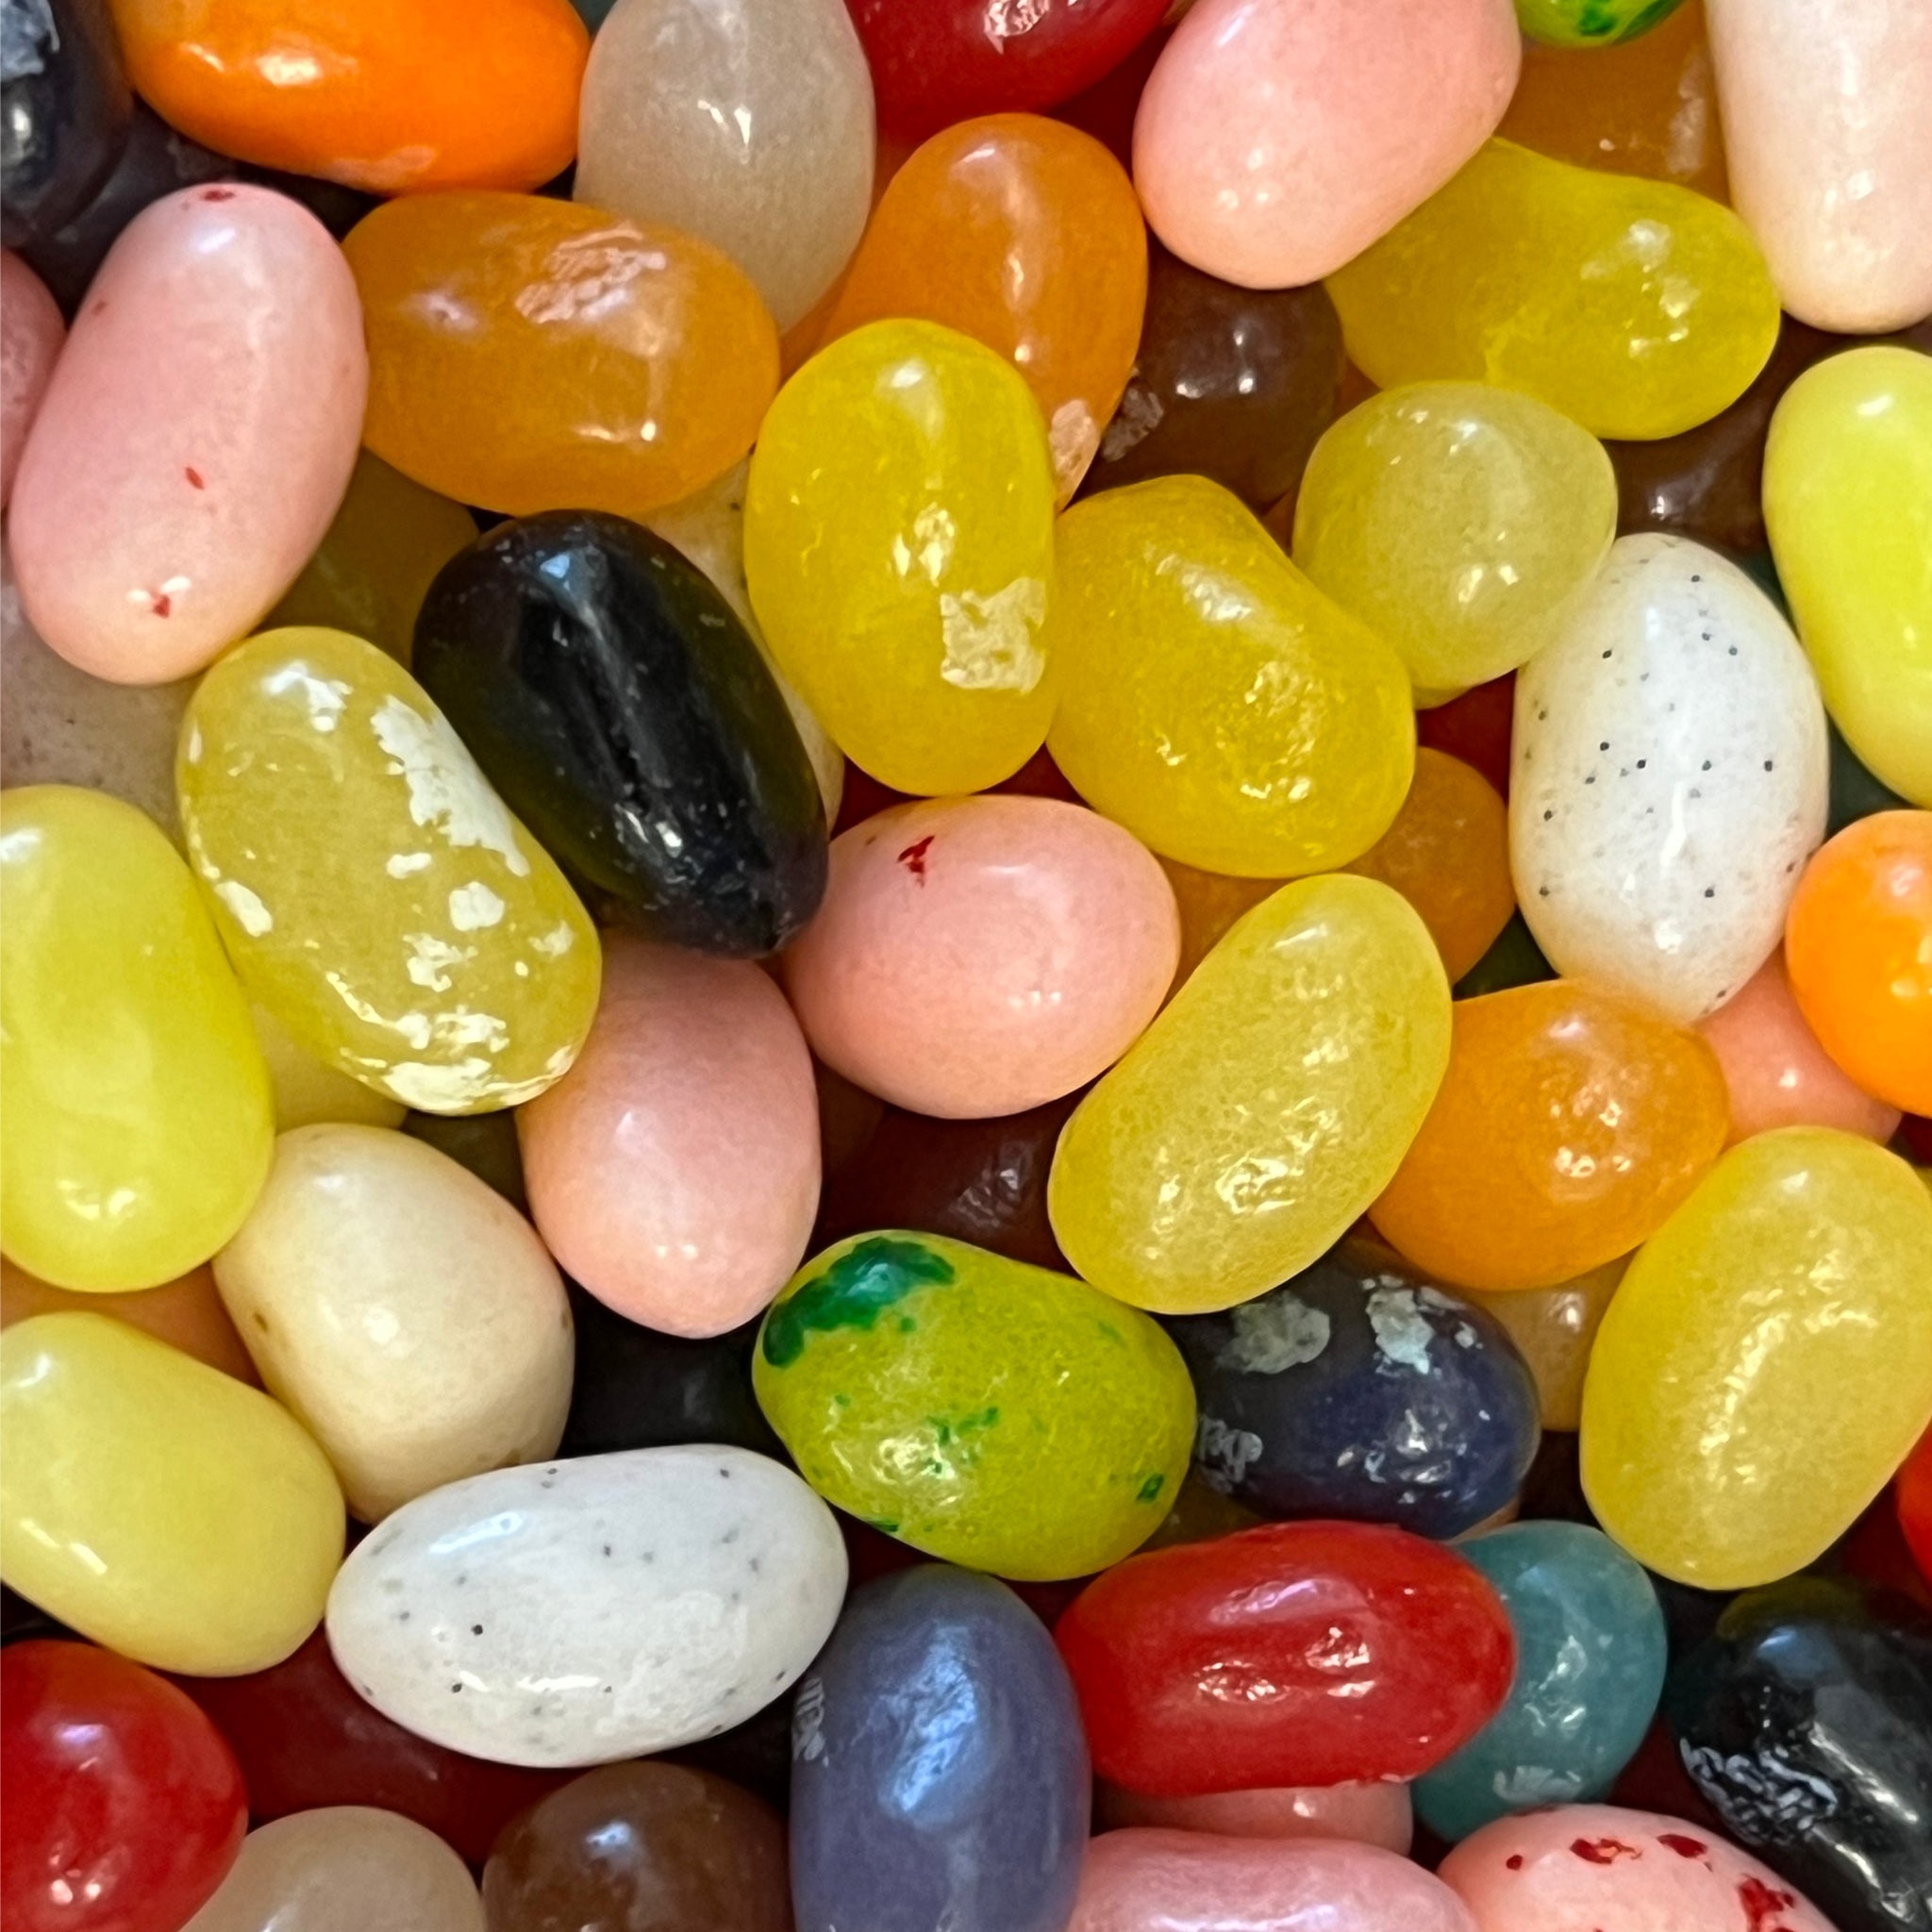 49 Flavors Jelly Belly Beans.  Multicolored jelly beans each are one of 49 flavors.